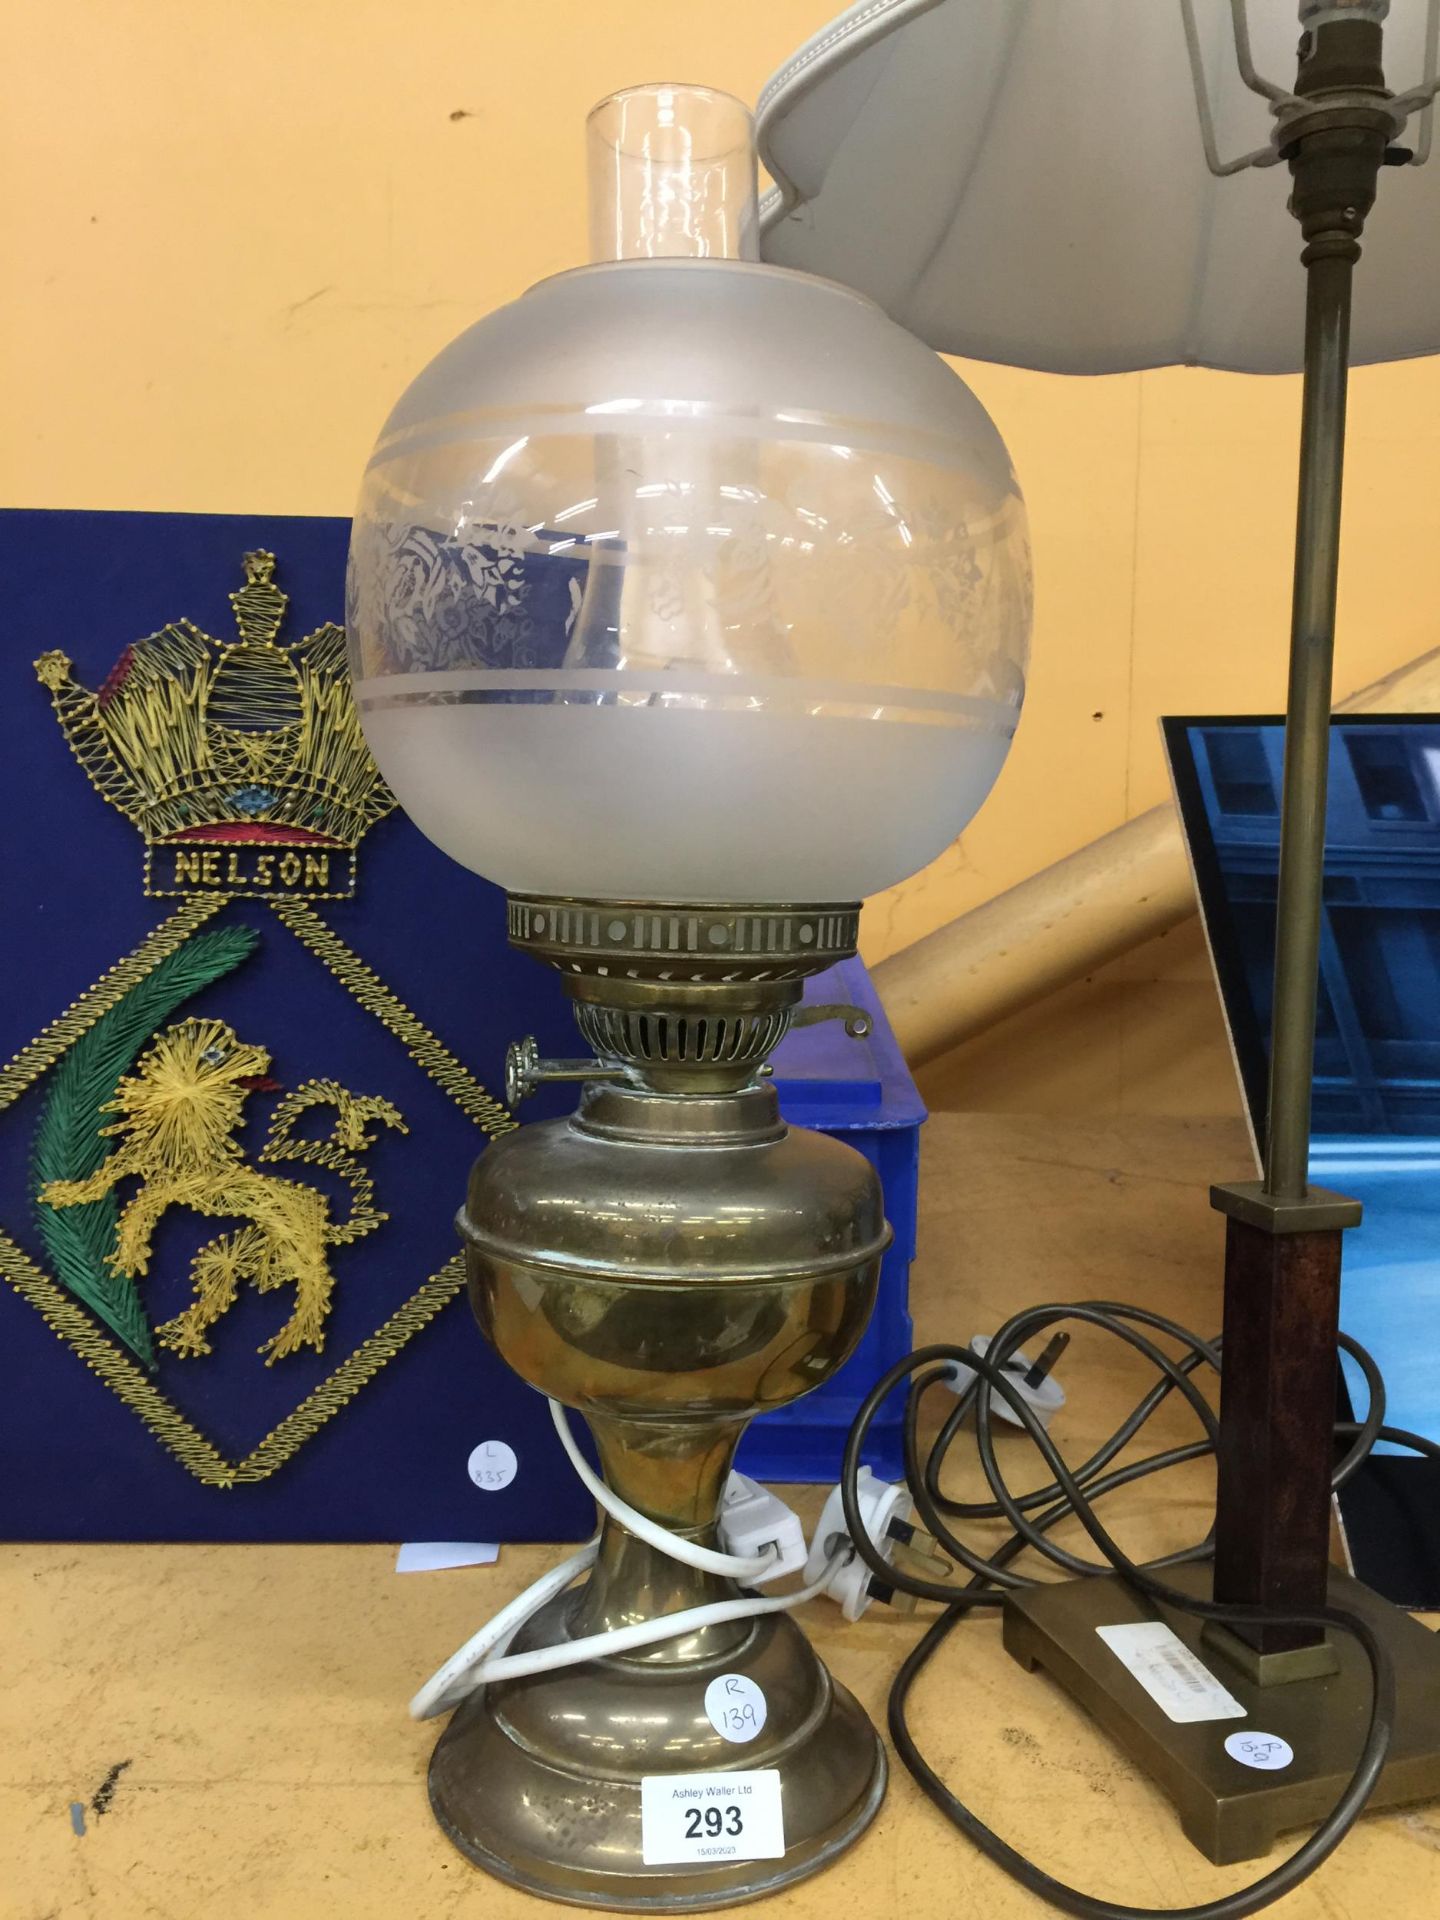 TWO LAMPS TO INCLUDE A BRASS OIL LAMP WITH GLASS FUNNEL AND SHADE AND A FRUTHER MODERN LAMP - Image 2 of 3